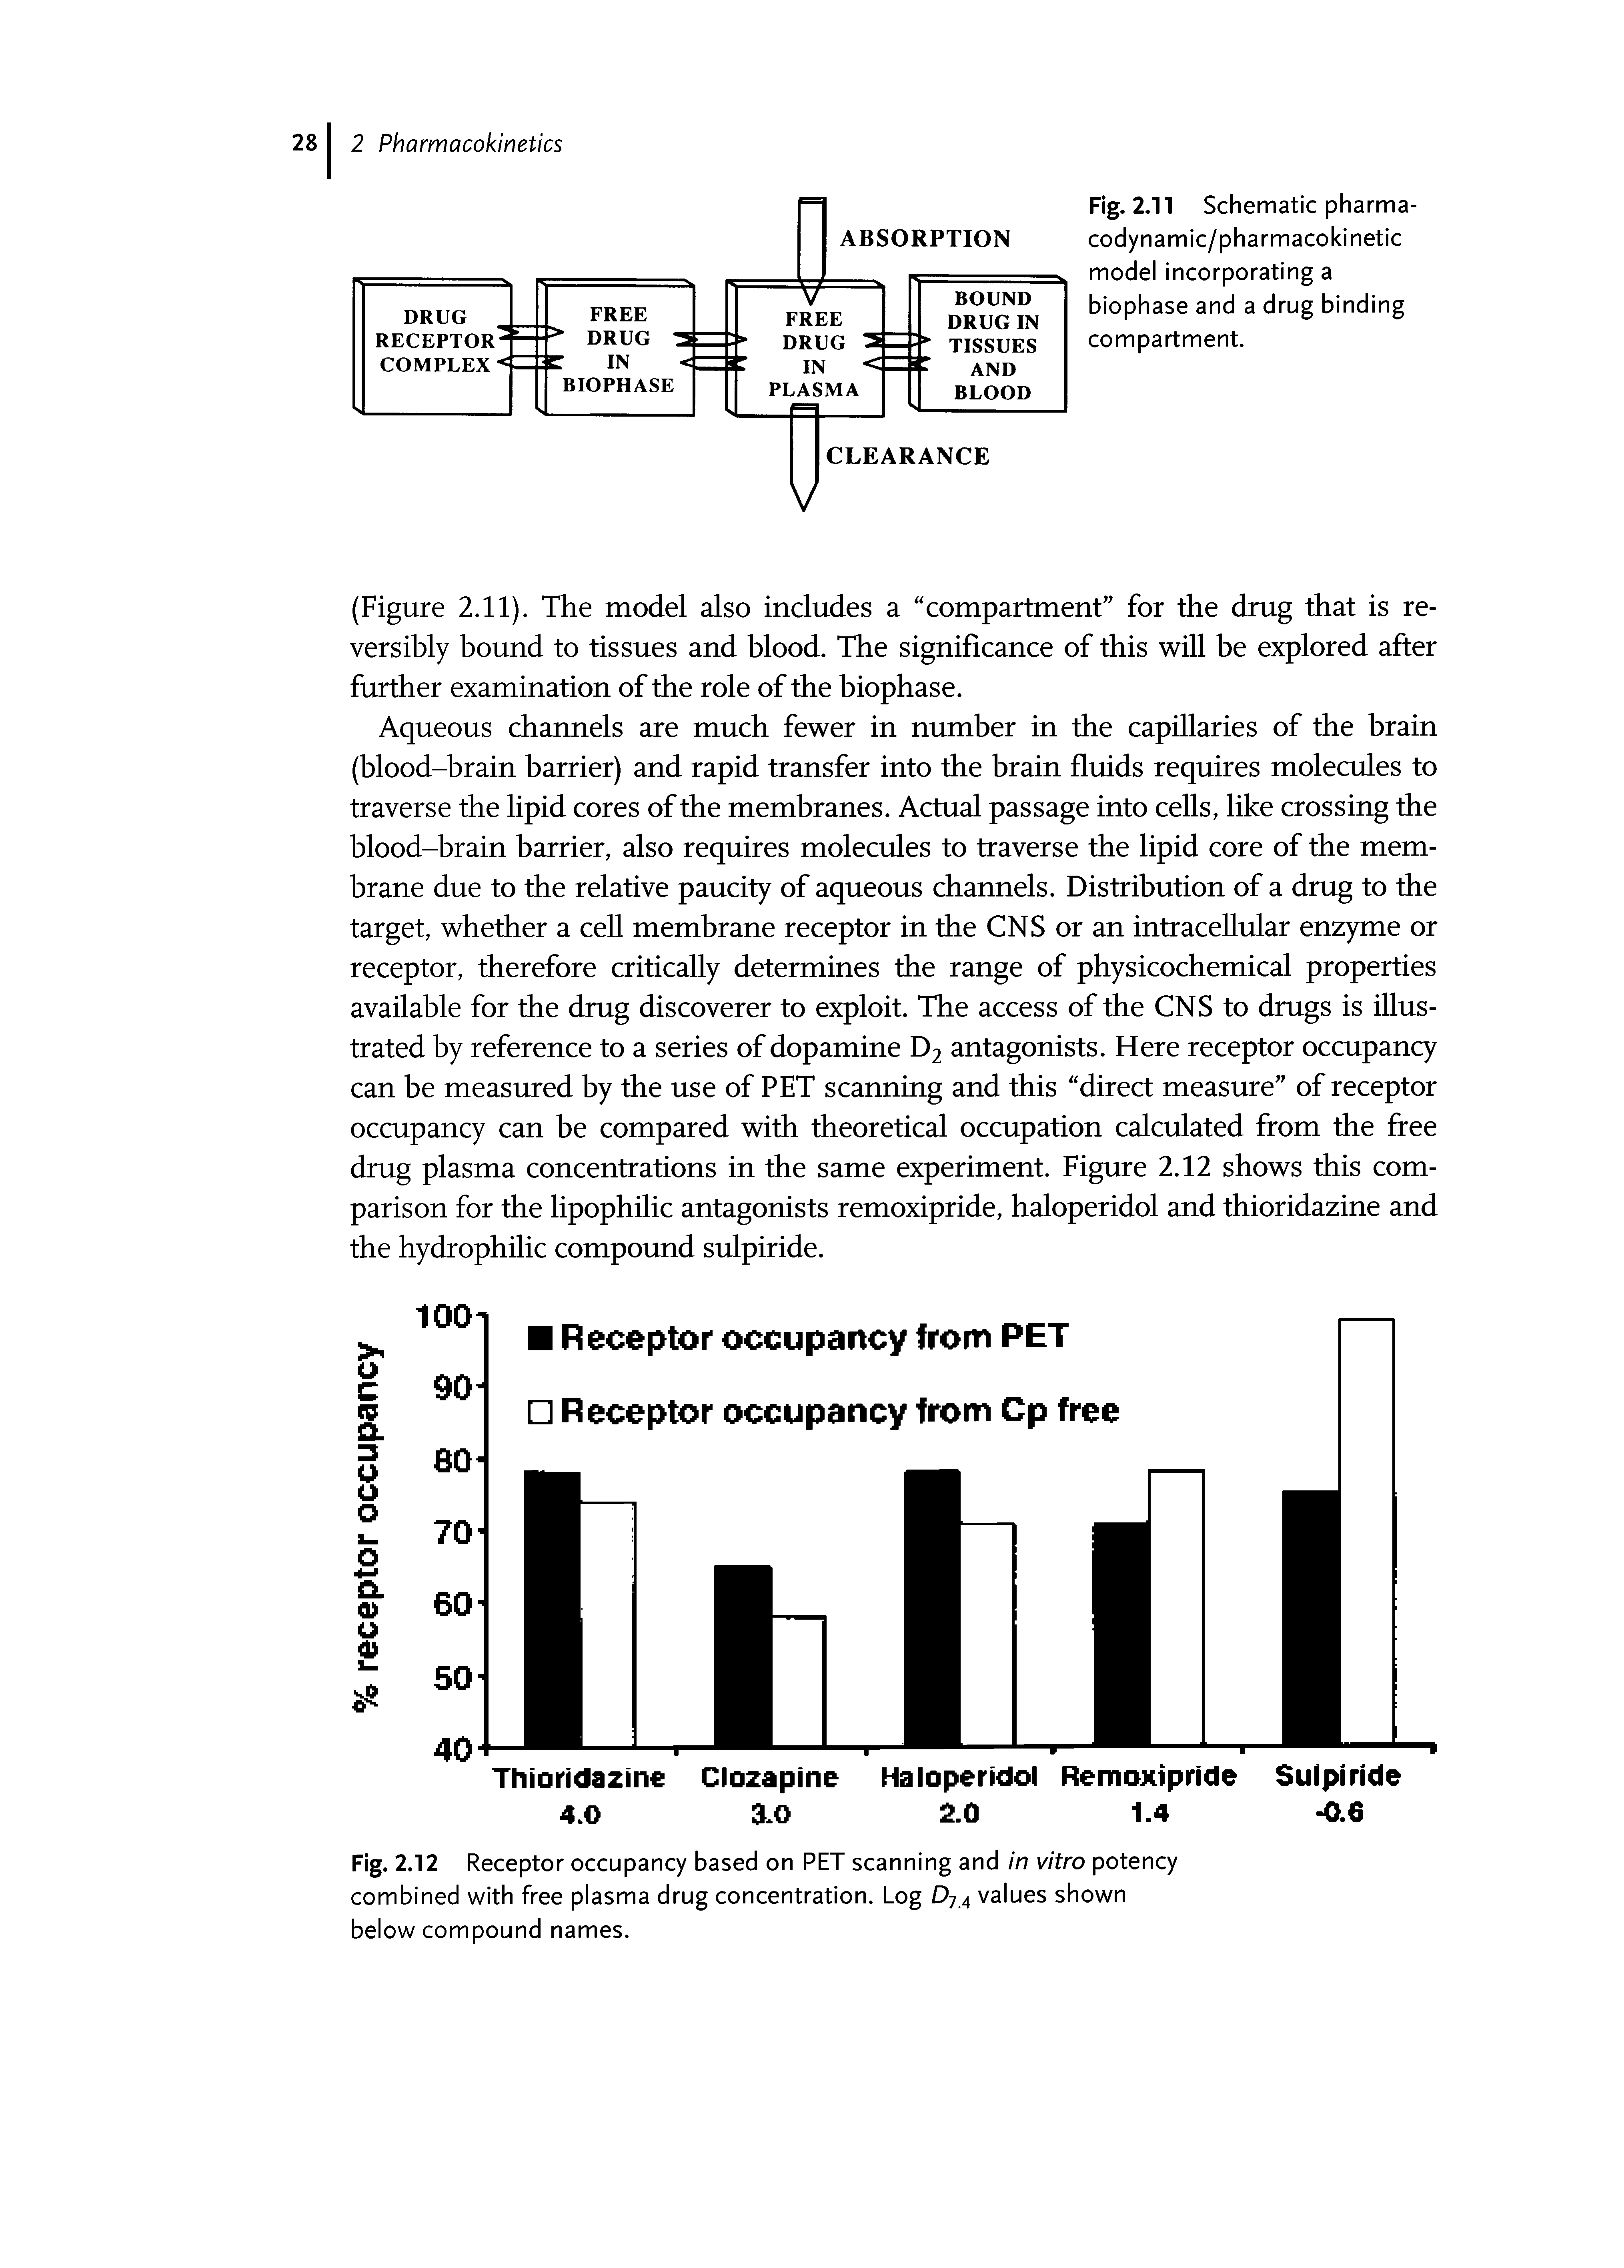 Fig. 2.12 Receptor occupancy based on PET scanning and in vitro potency combined with free plasma drug concentration. Log D74 values shown below compound names.